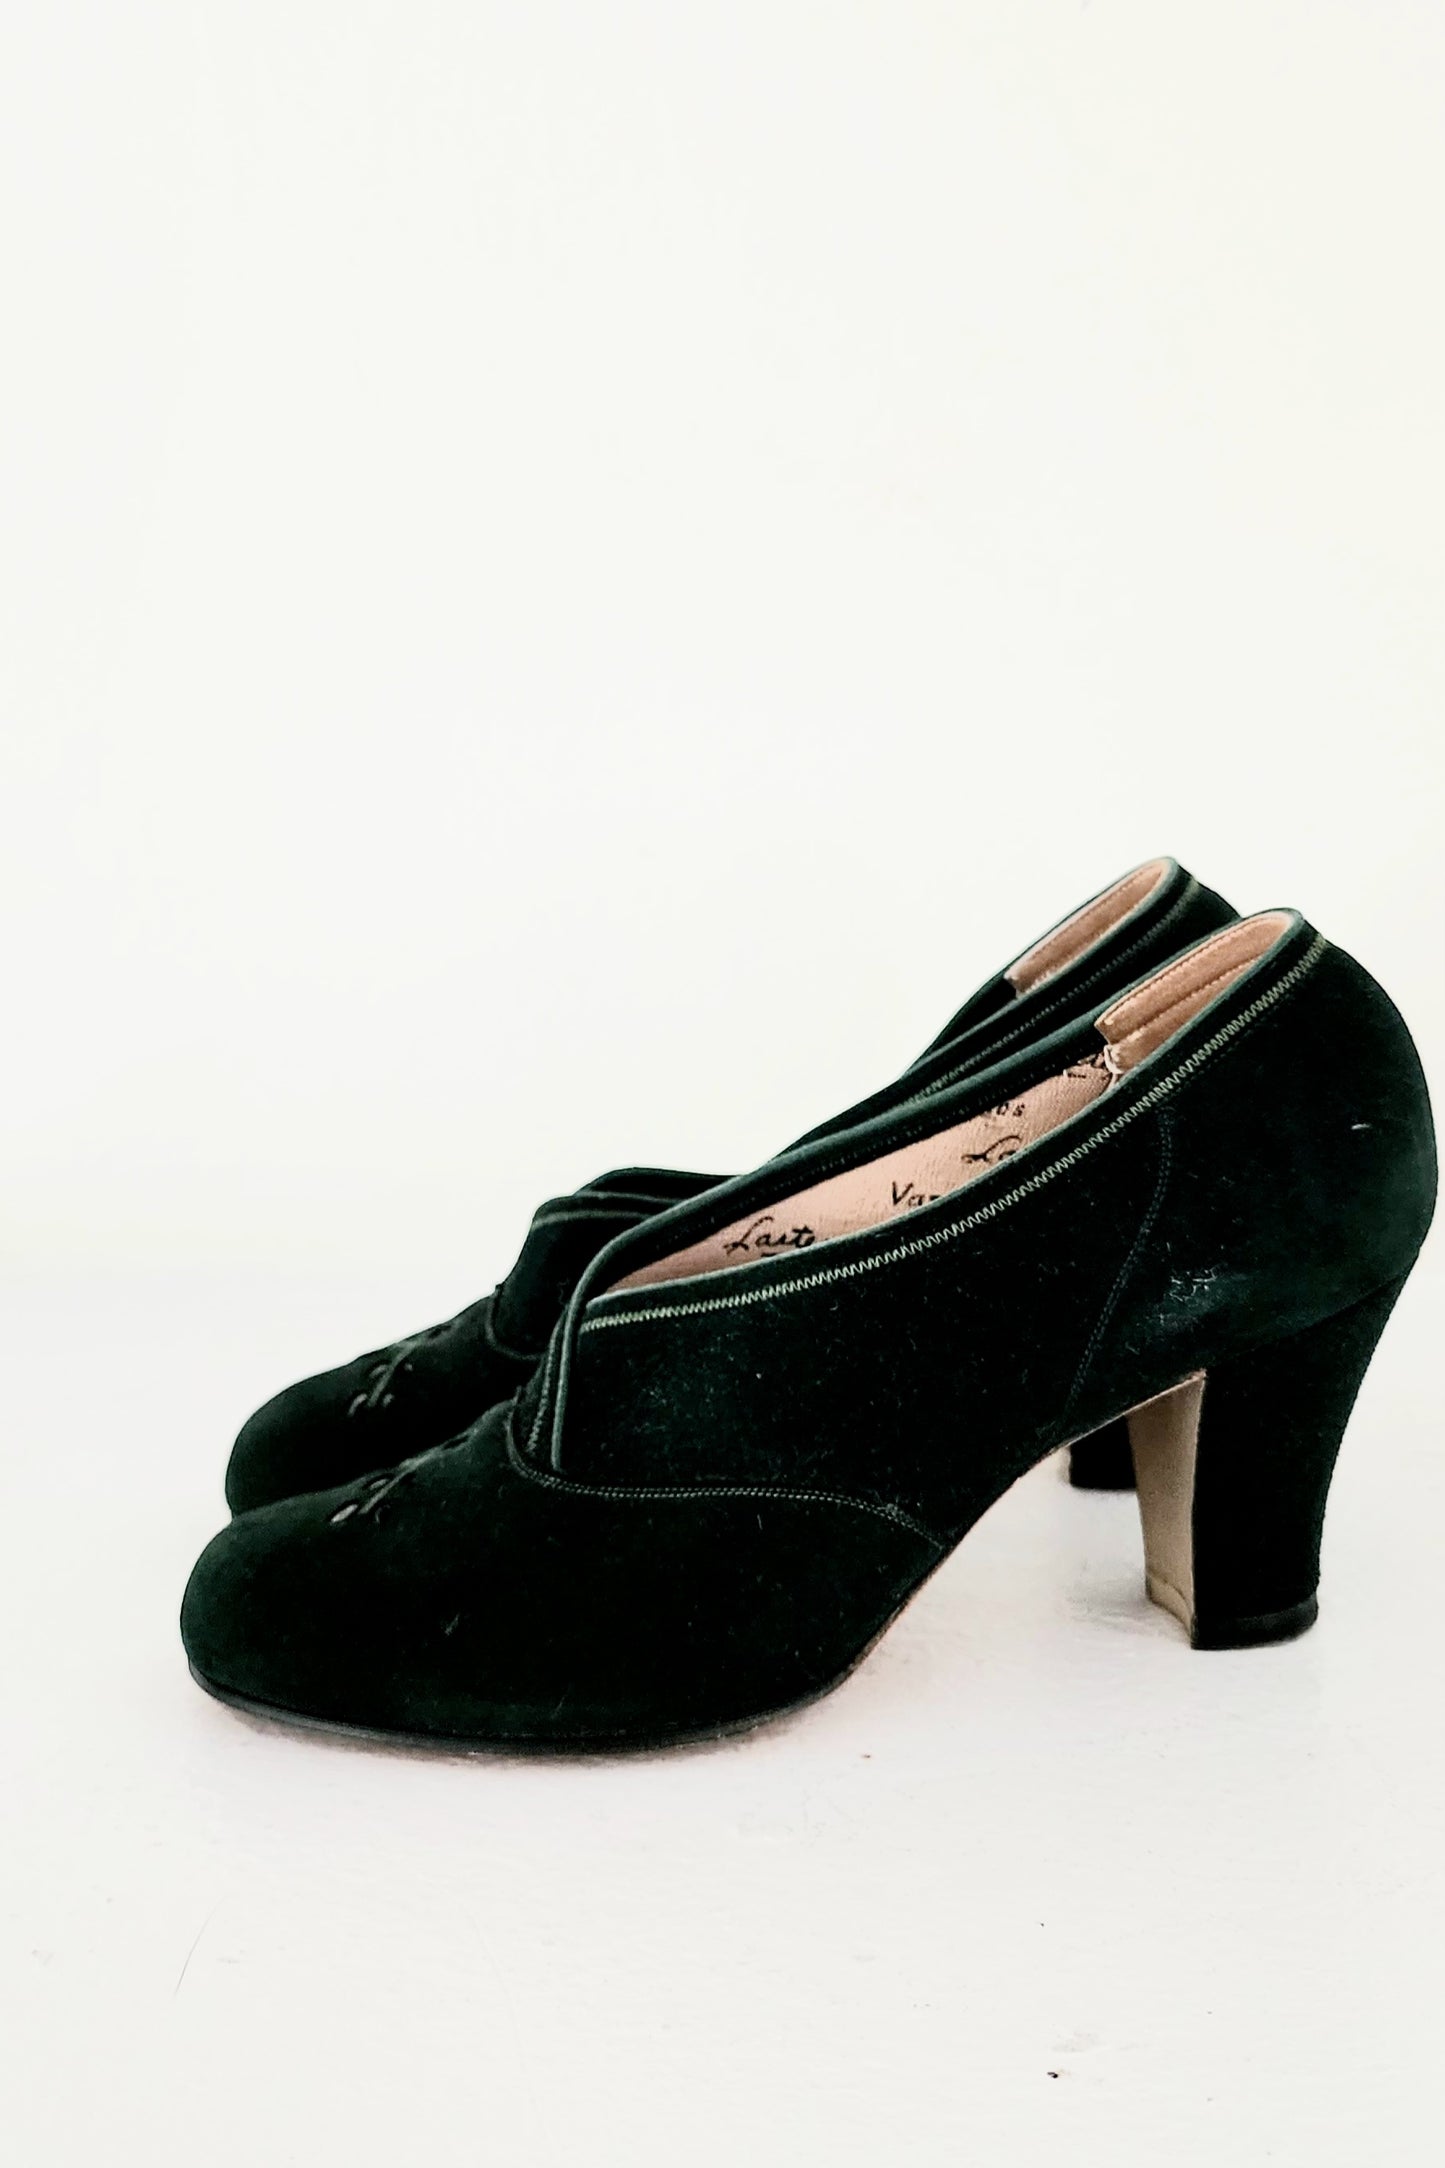 40s Green Suede Shoes High Heel Pumps by Walk Over size 5